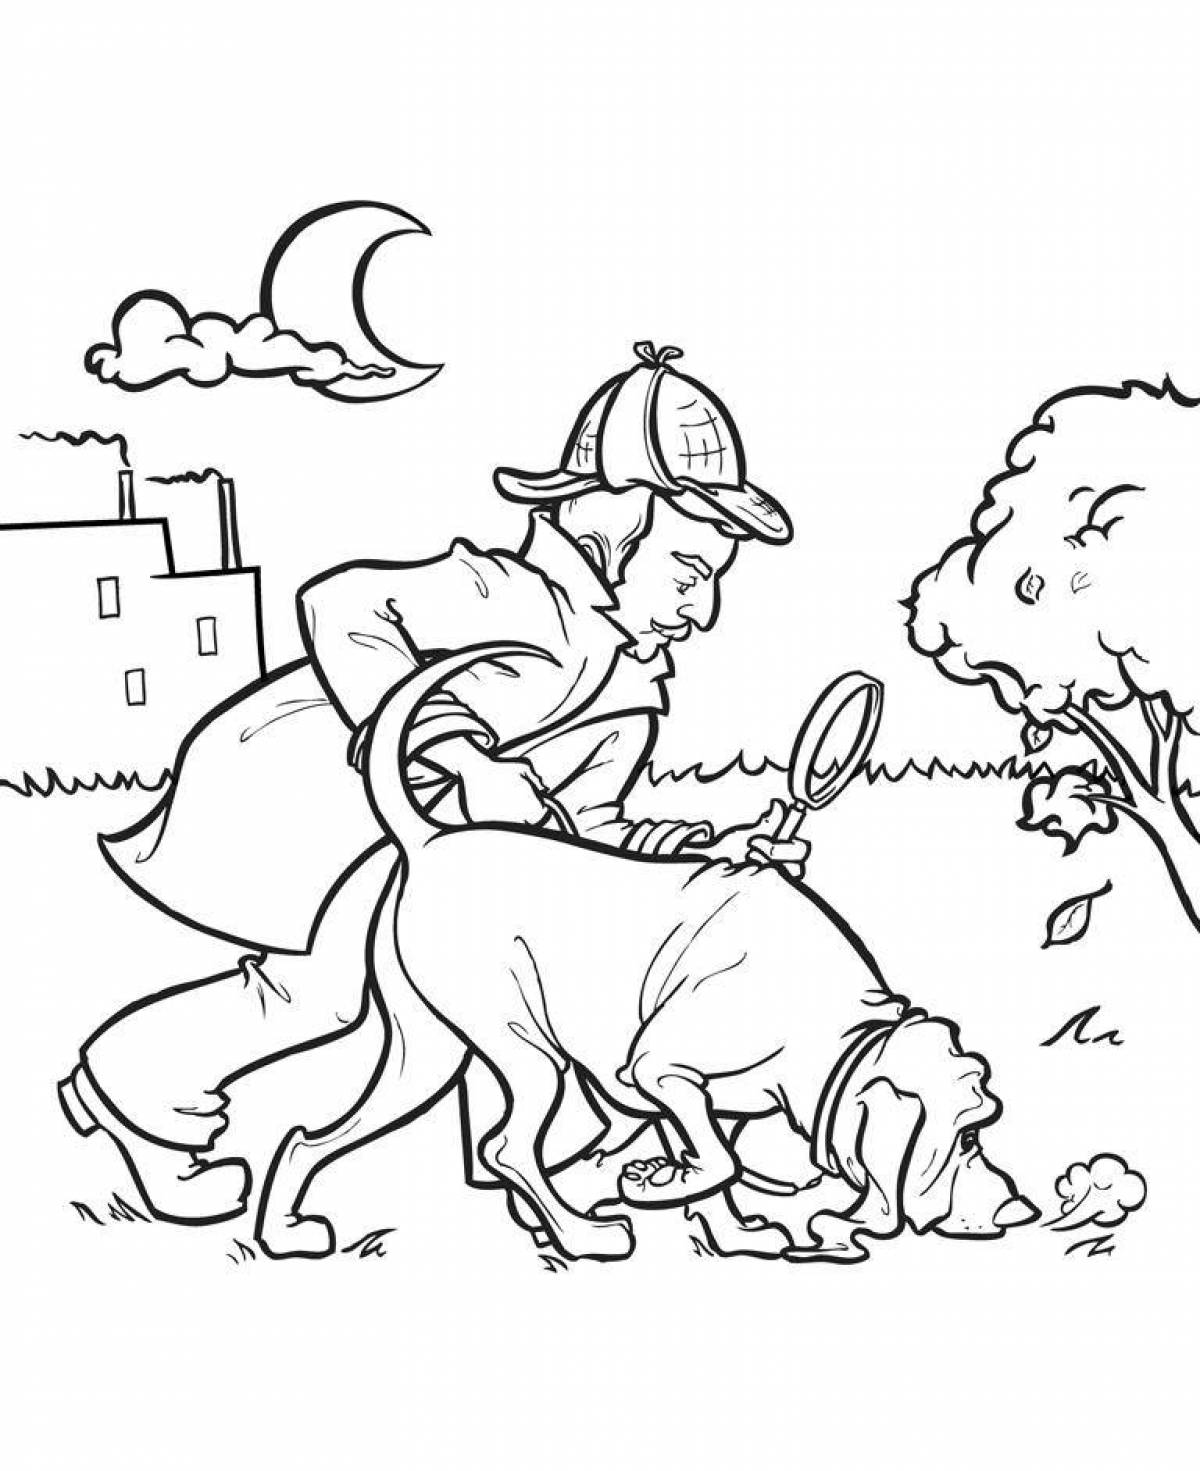 Decisive police dog coloring book